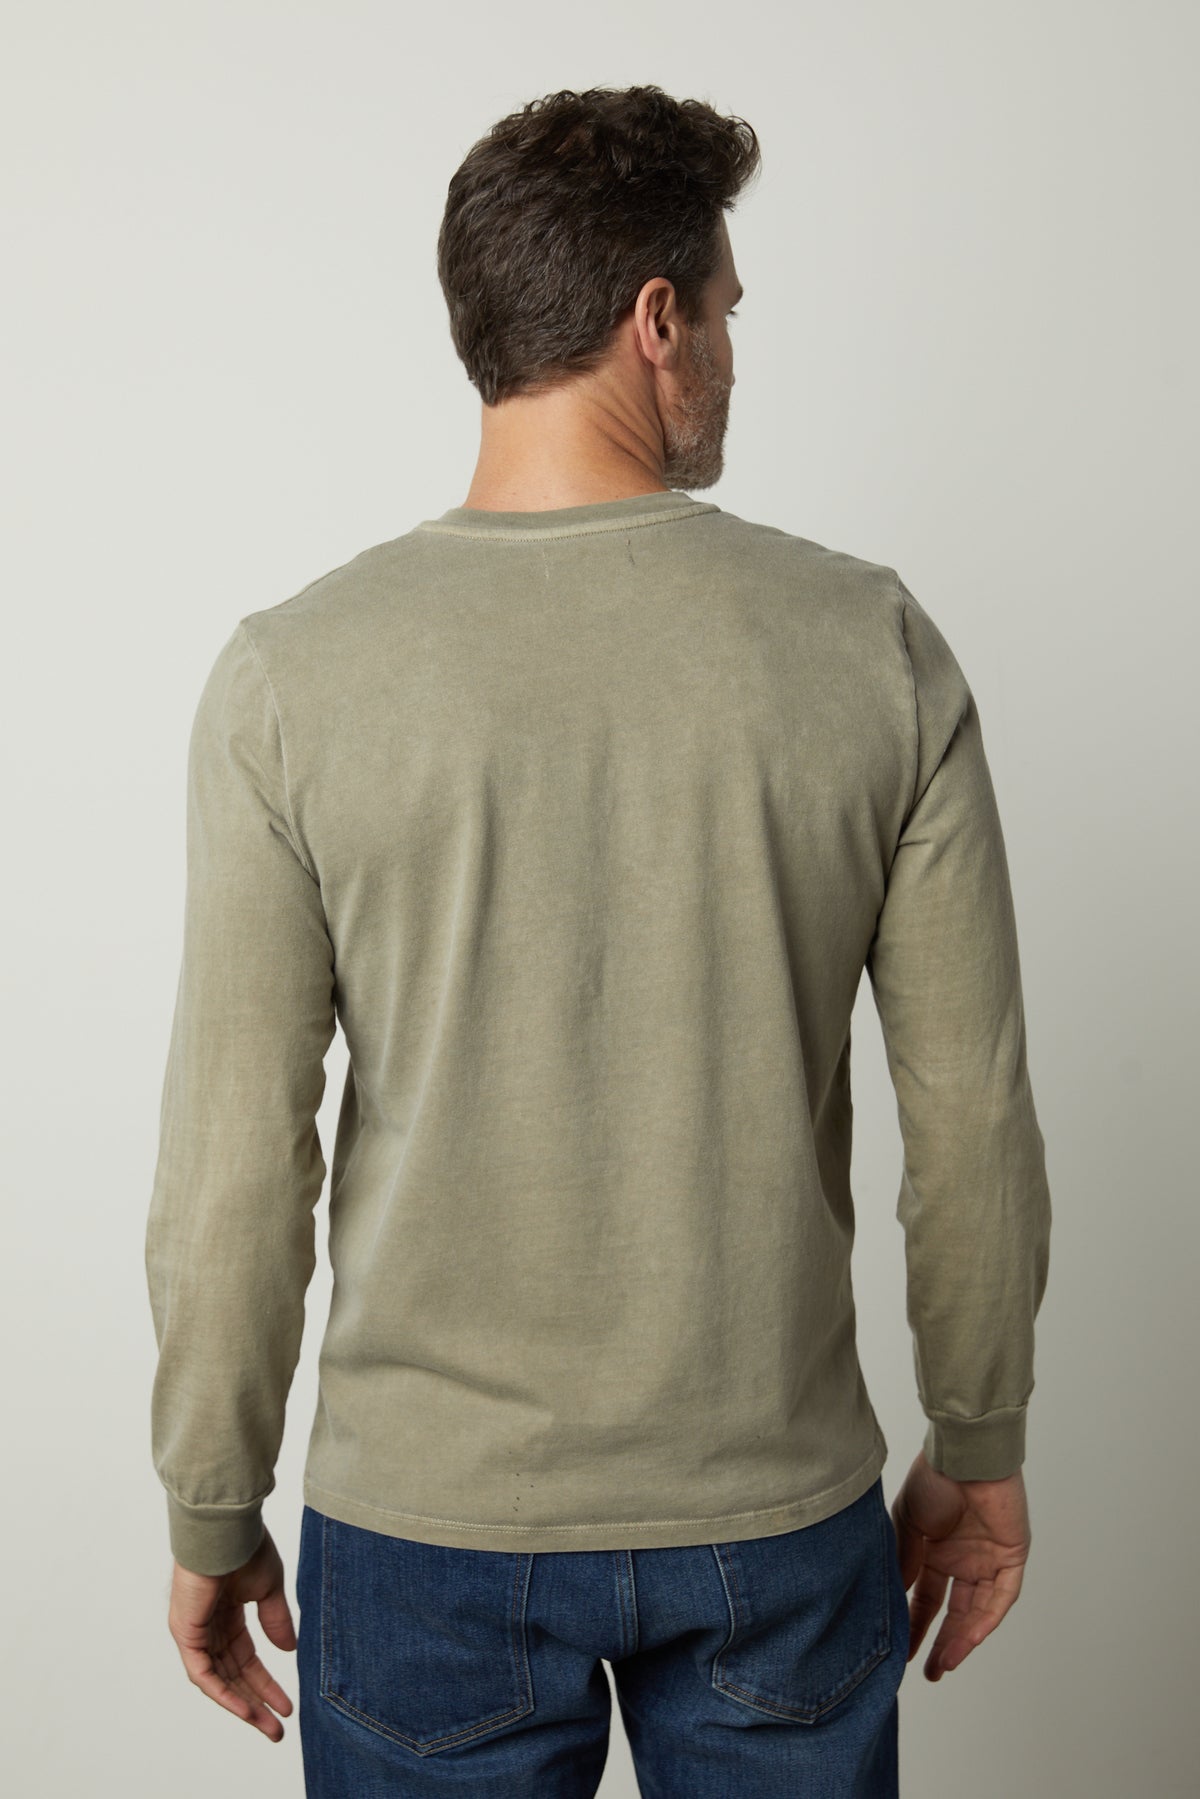 The back view of a man wearing Velvet by Graham & Spencer REMI HENLEY jeans and a long-sleeved shirt.-26827678122177